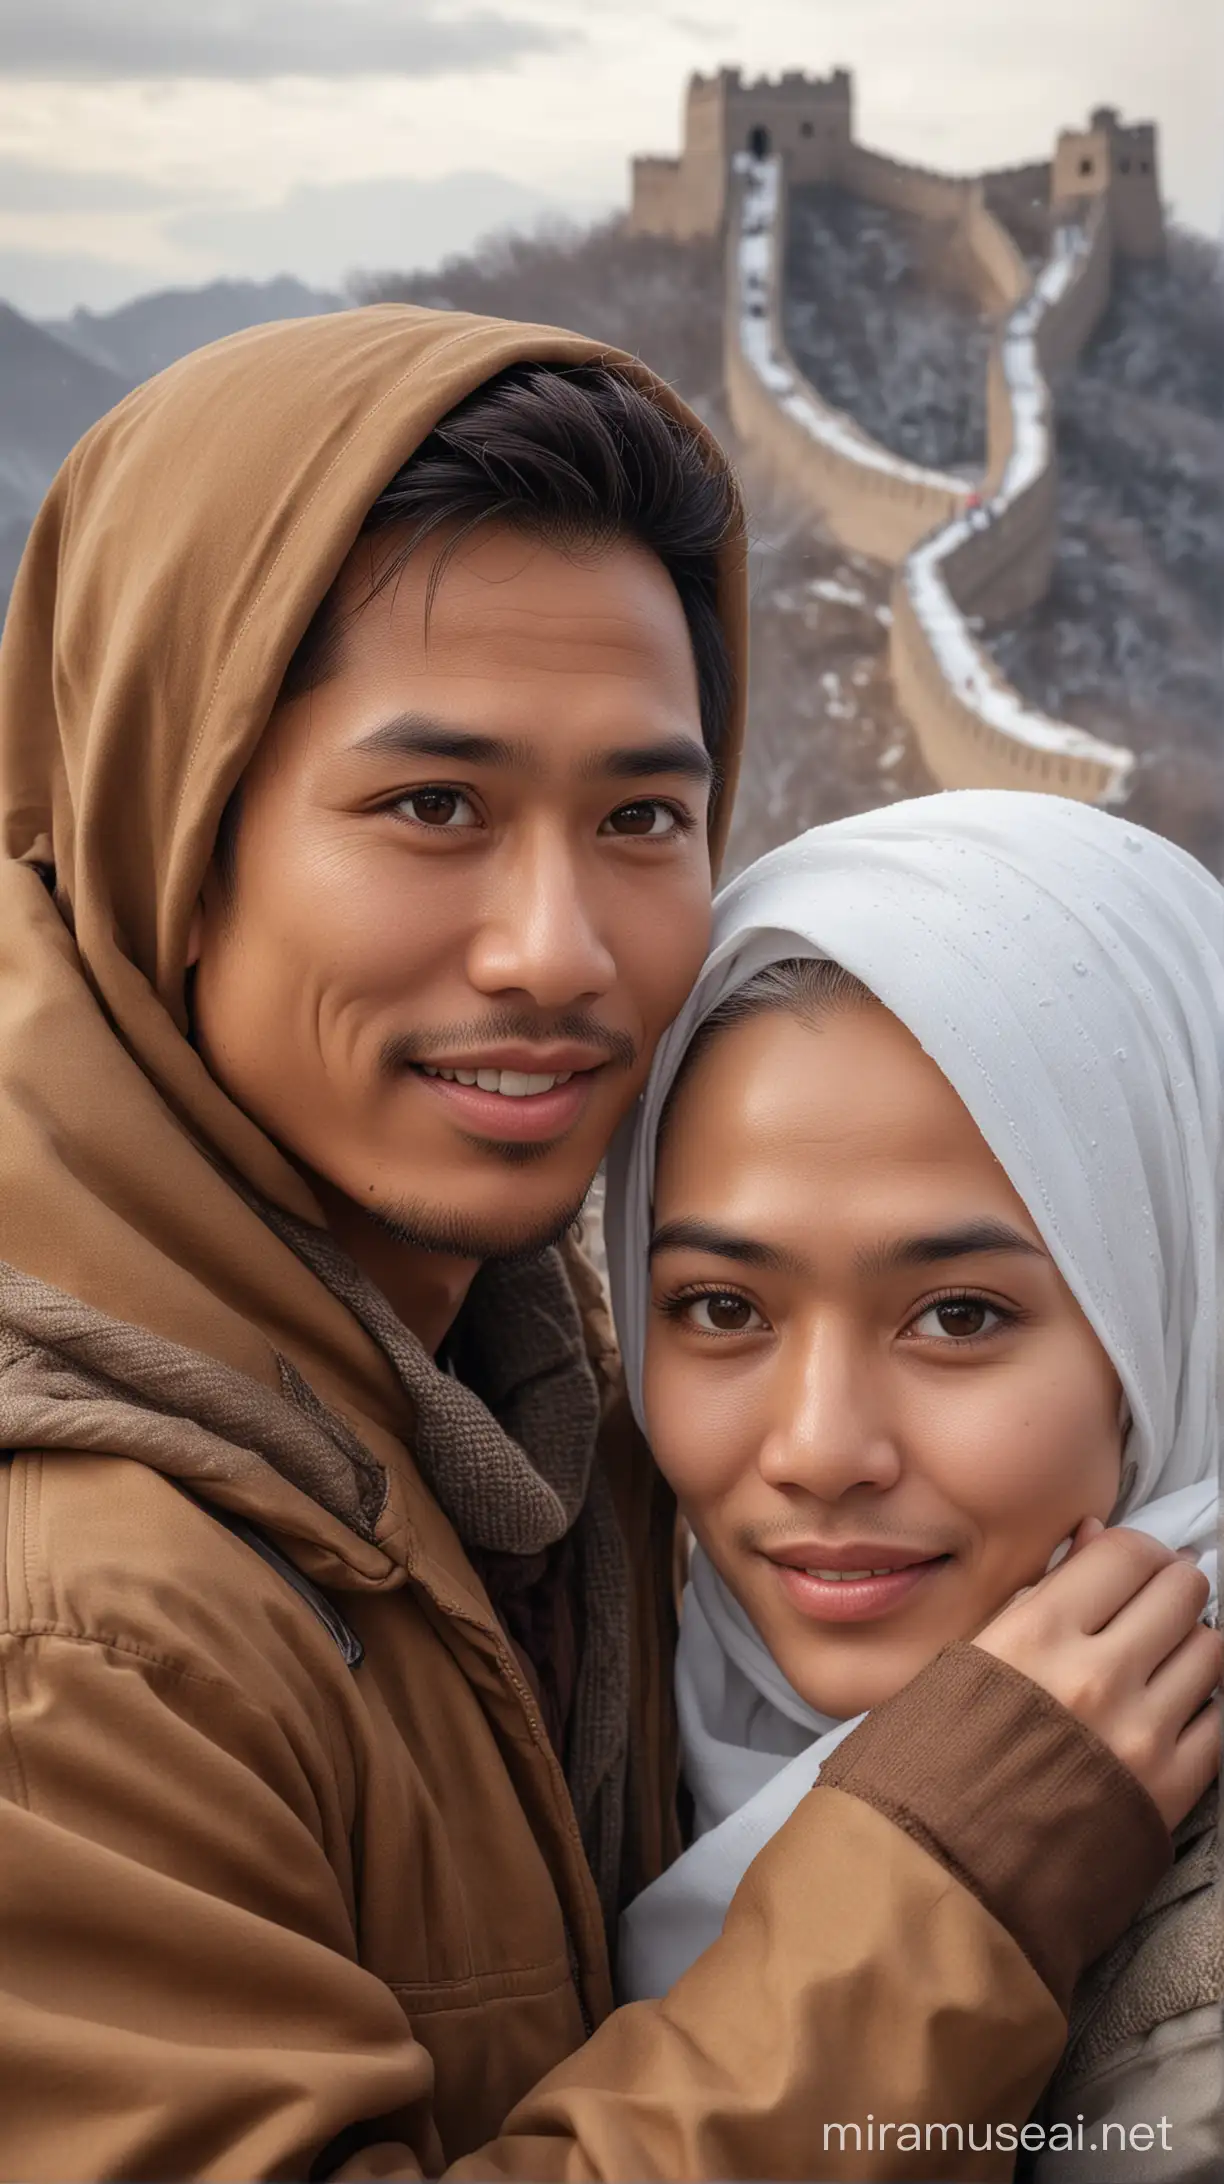 Indonesian Couple Embracing on the Great Wall of China